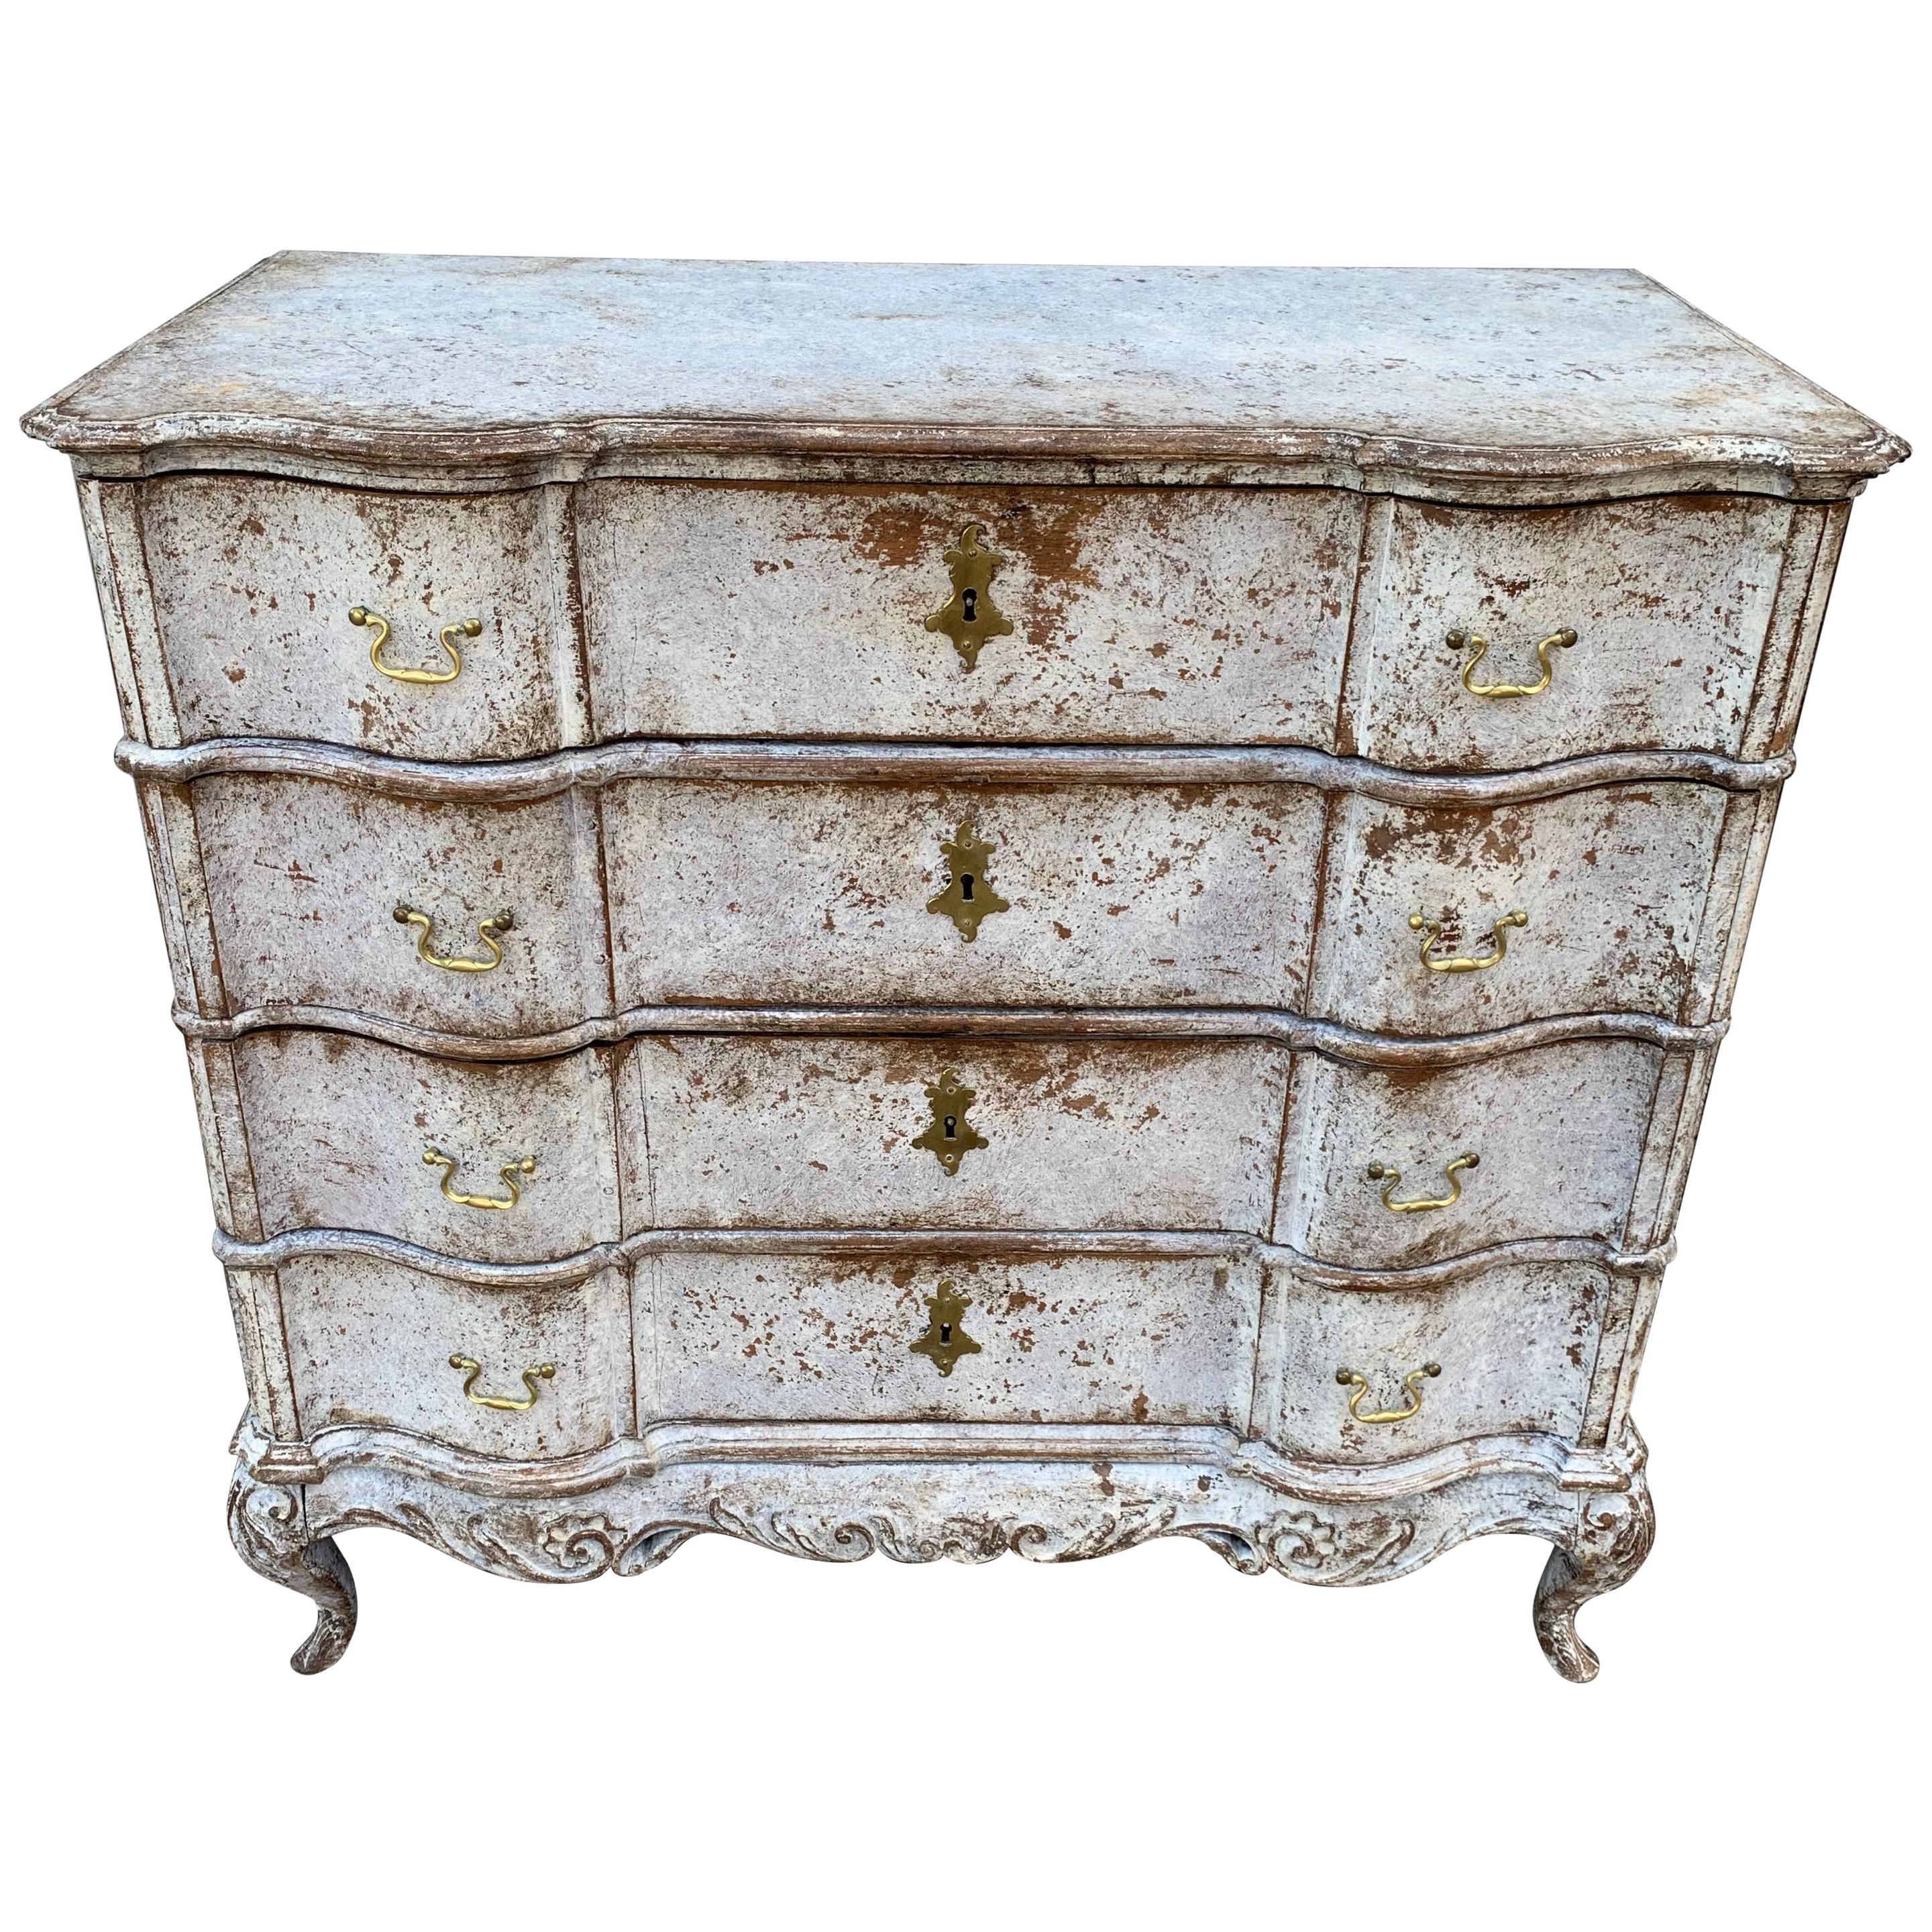 18th Century Scandinavian Painted Baroque Chest of Drawers